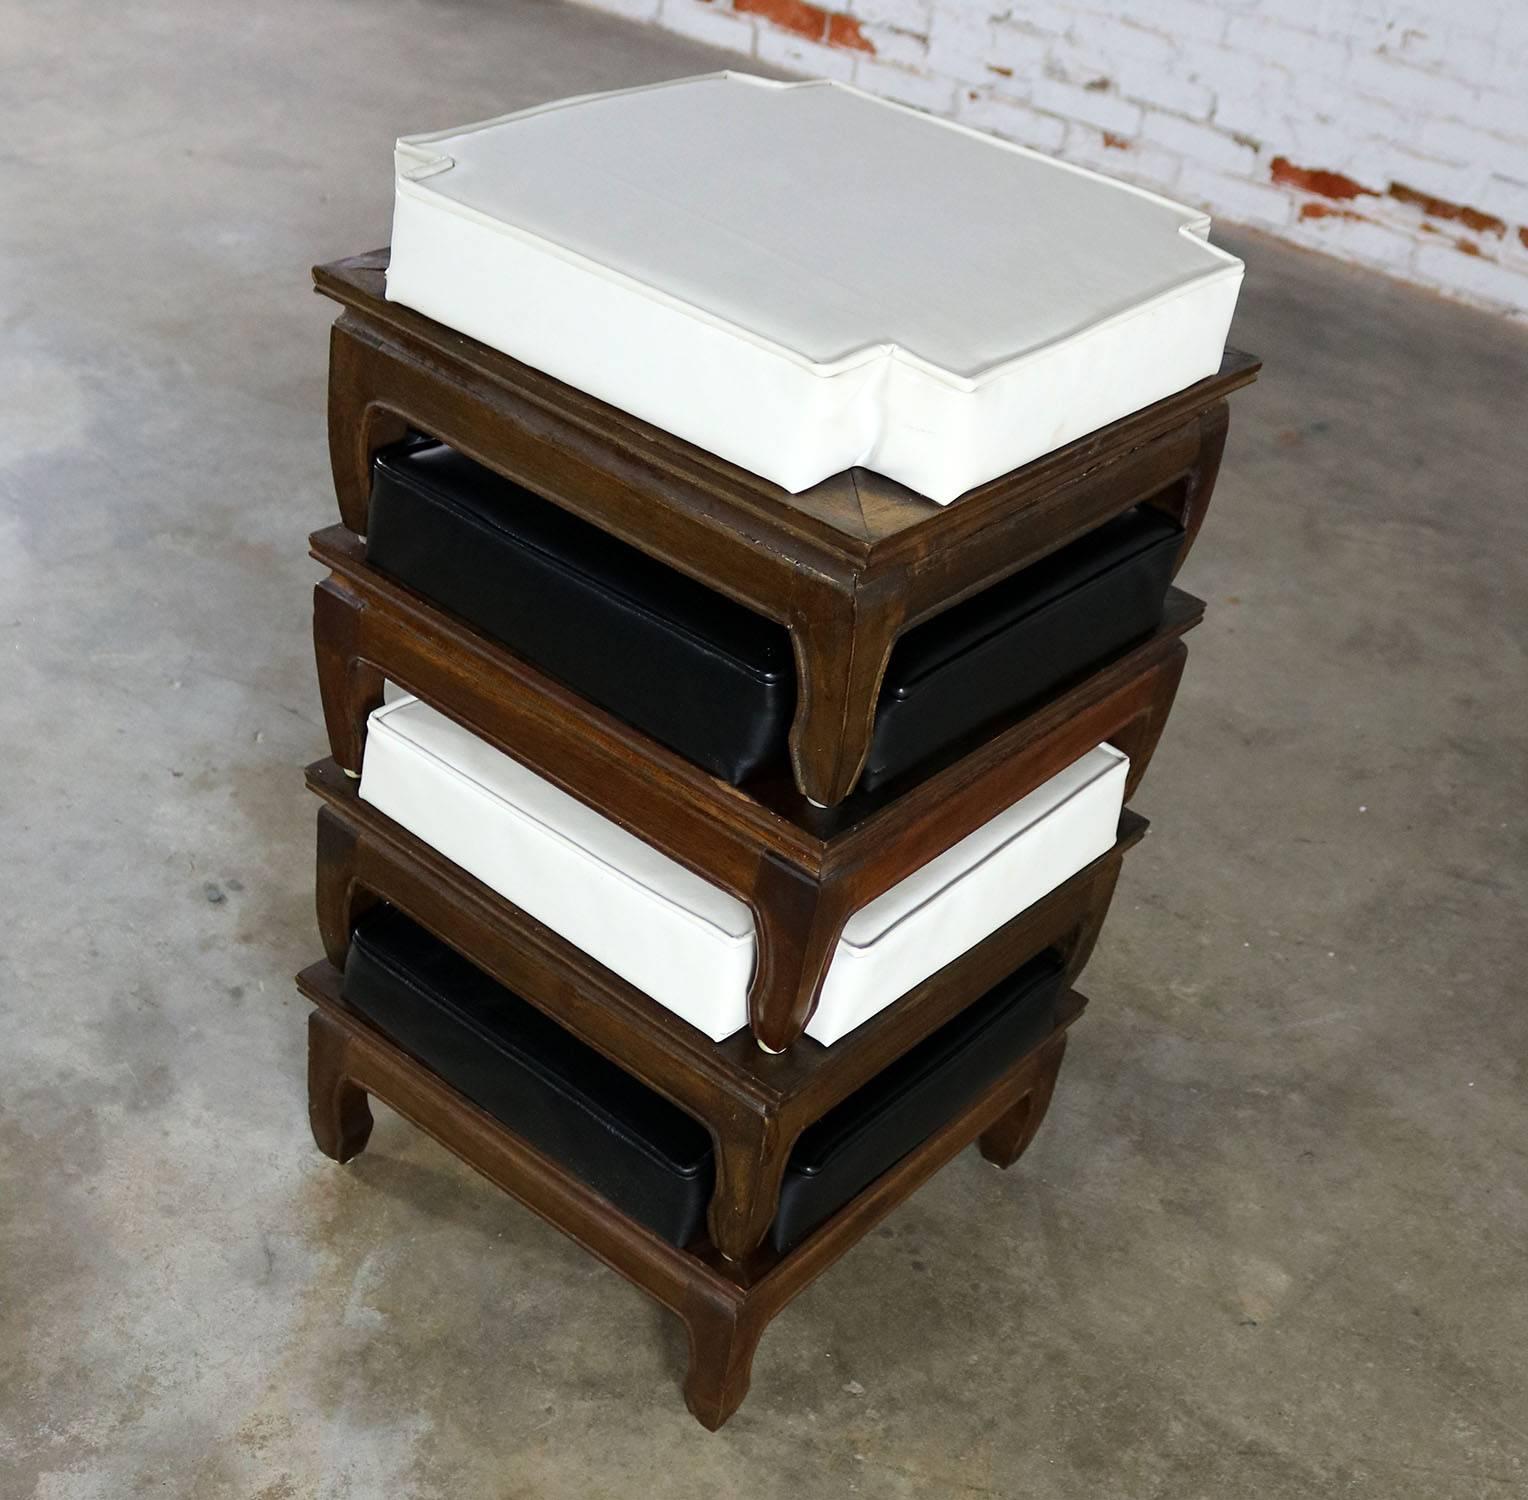 20th Century Black and White Upholstered Stacking Ottomans Teak Ming Style Feet Mid-Century